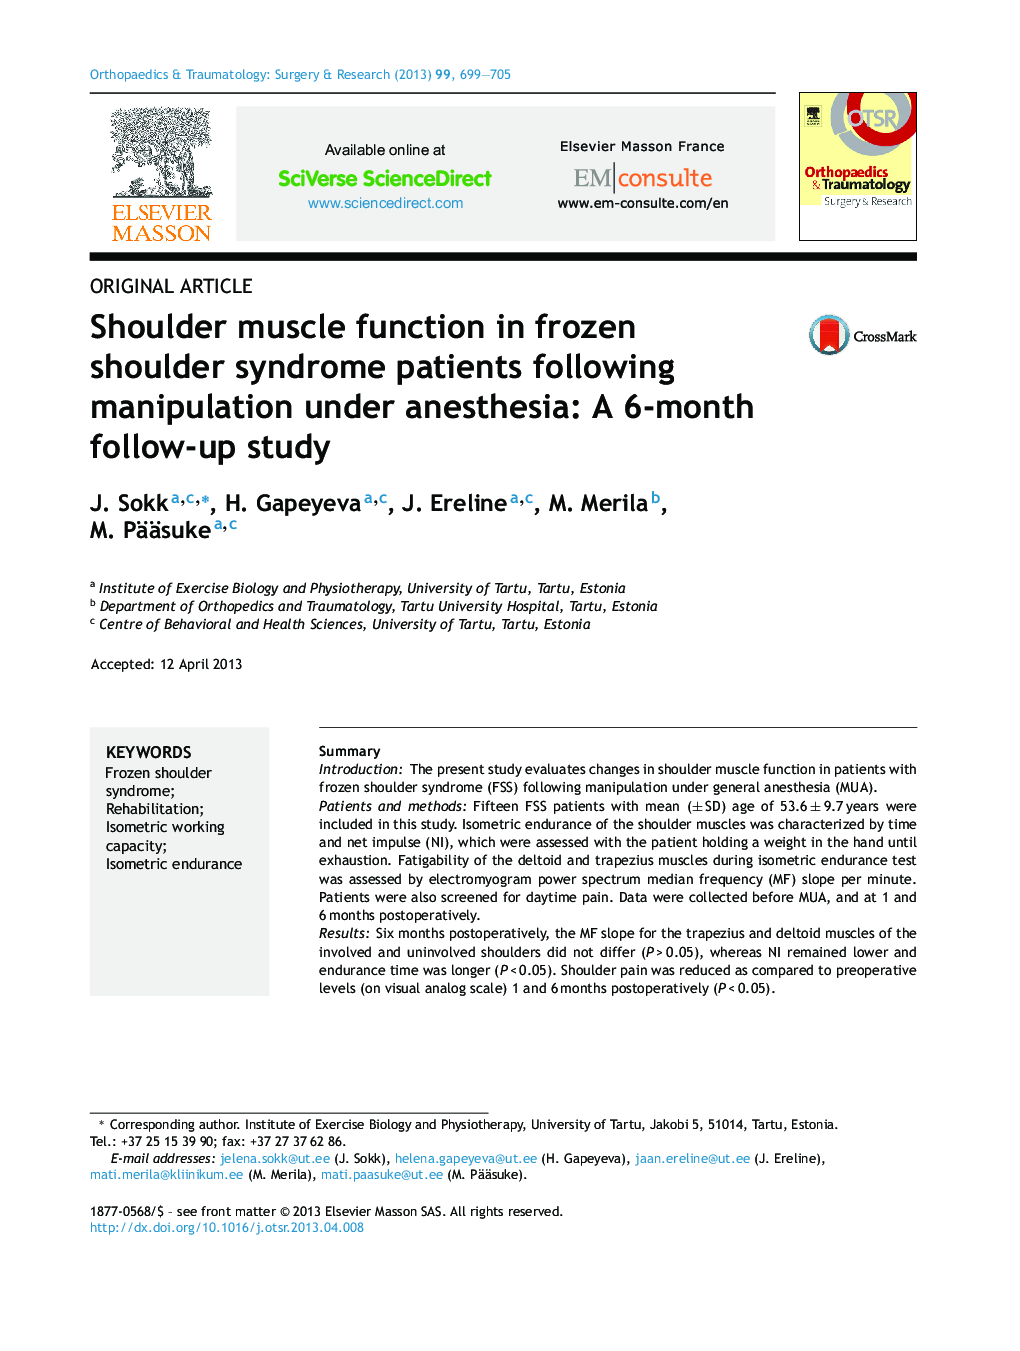 Shoulder muscle function in frozen shoulder syndrome patients following manipulation under anesthesia: A 6-month follow-up study